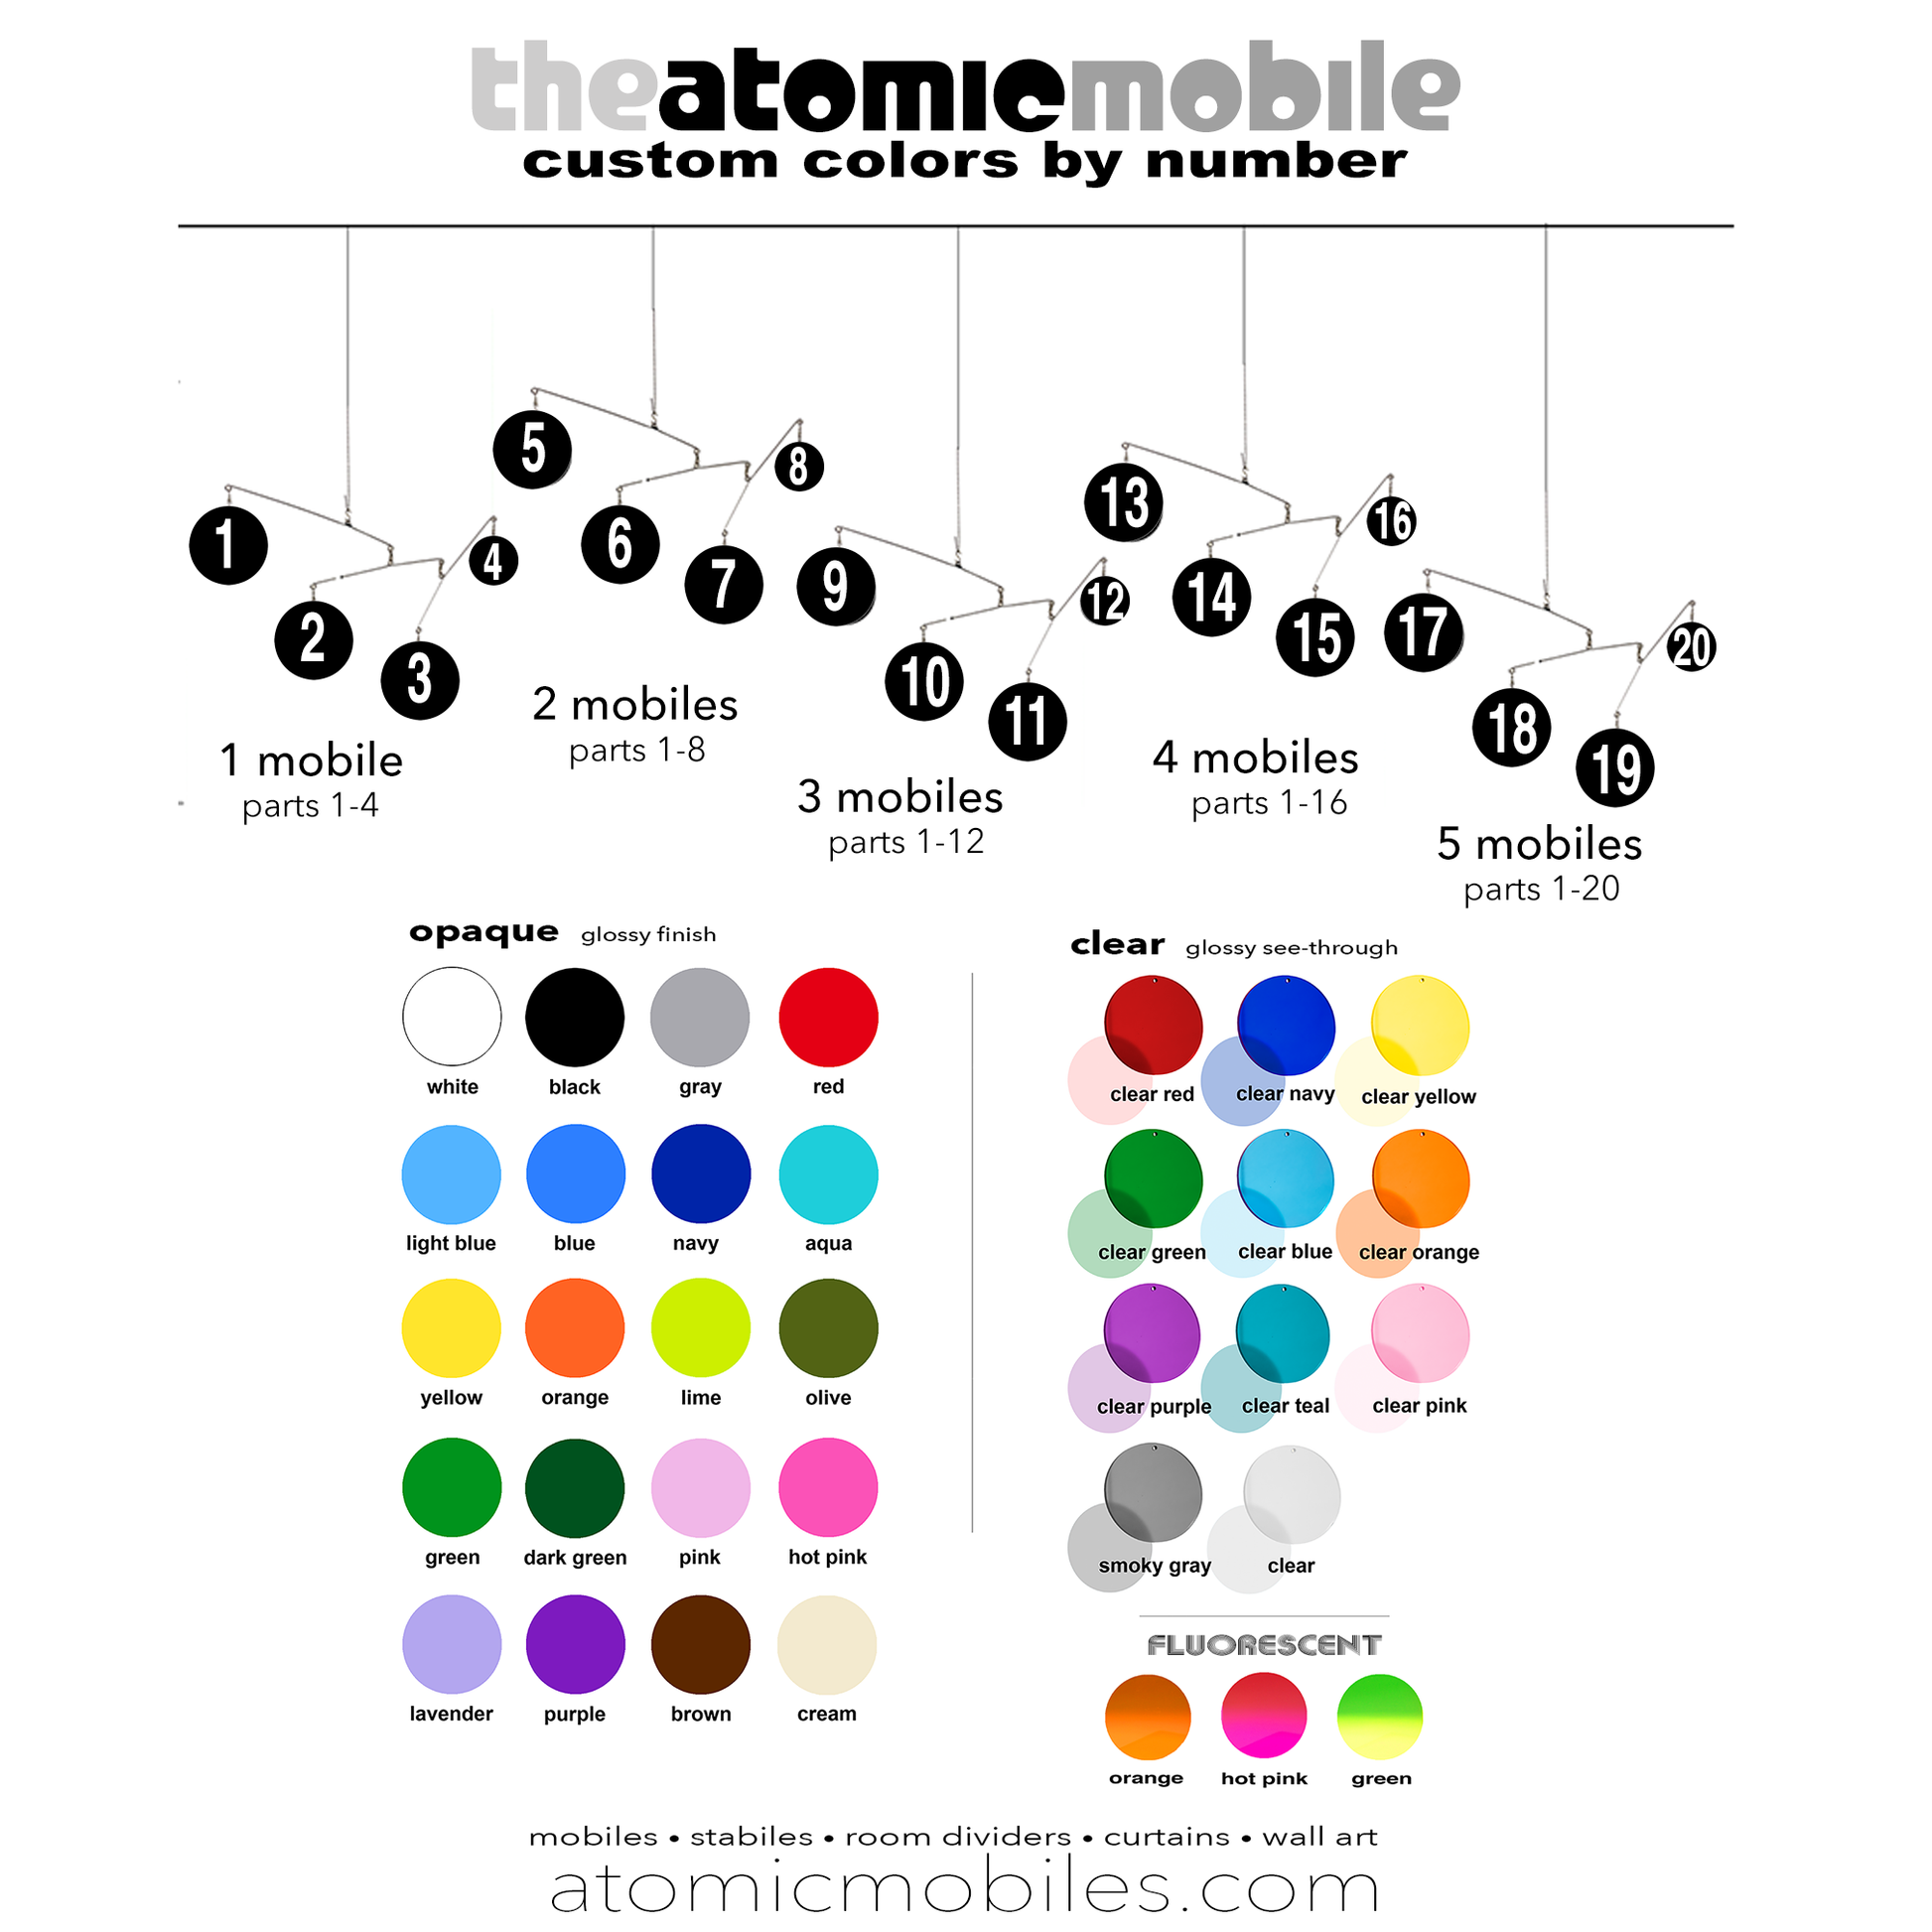 Color Chart - choose your own Christmas decorations Atomic Mobiles colors - not just limited to red and green! Cool mid century modern mobiles for Christmas and beyond by AtomicMobiles.com